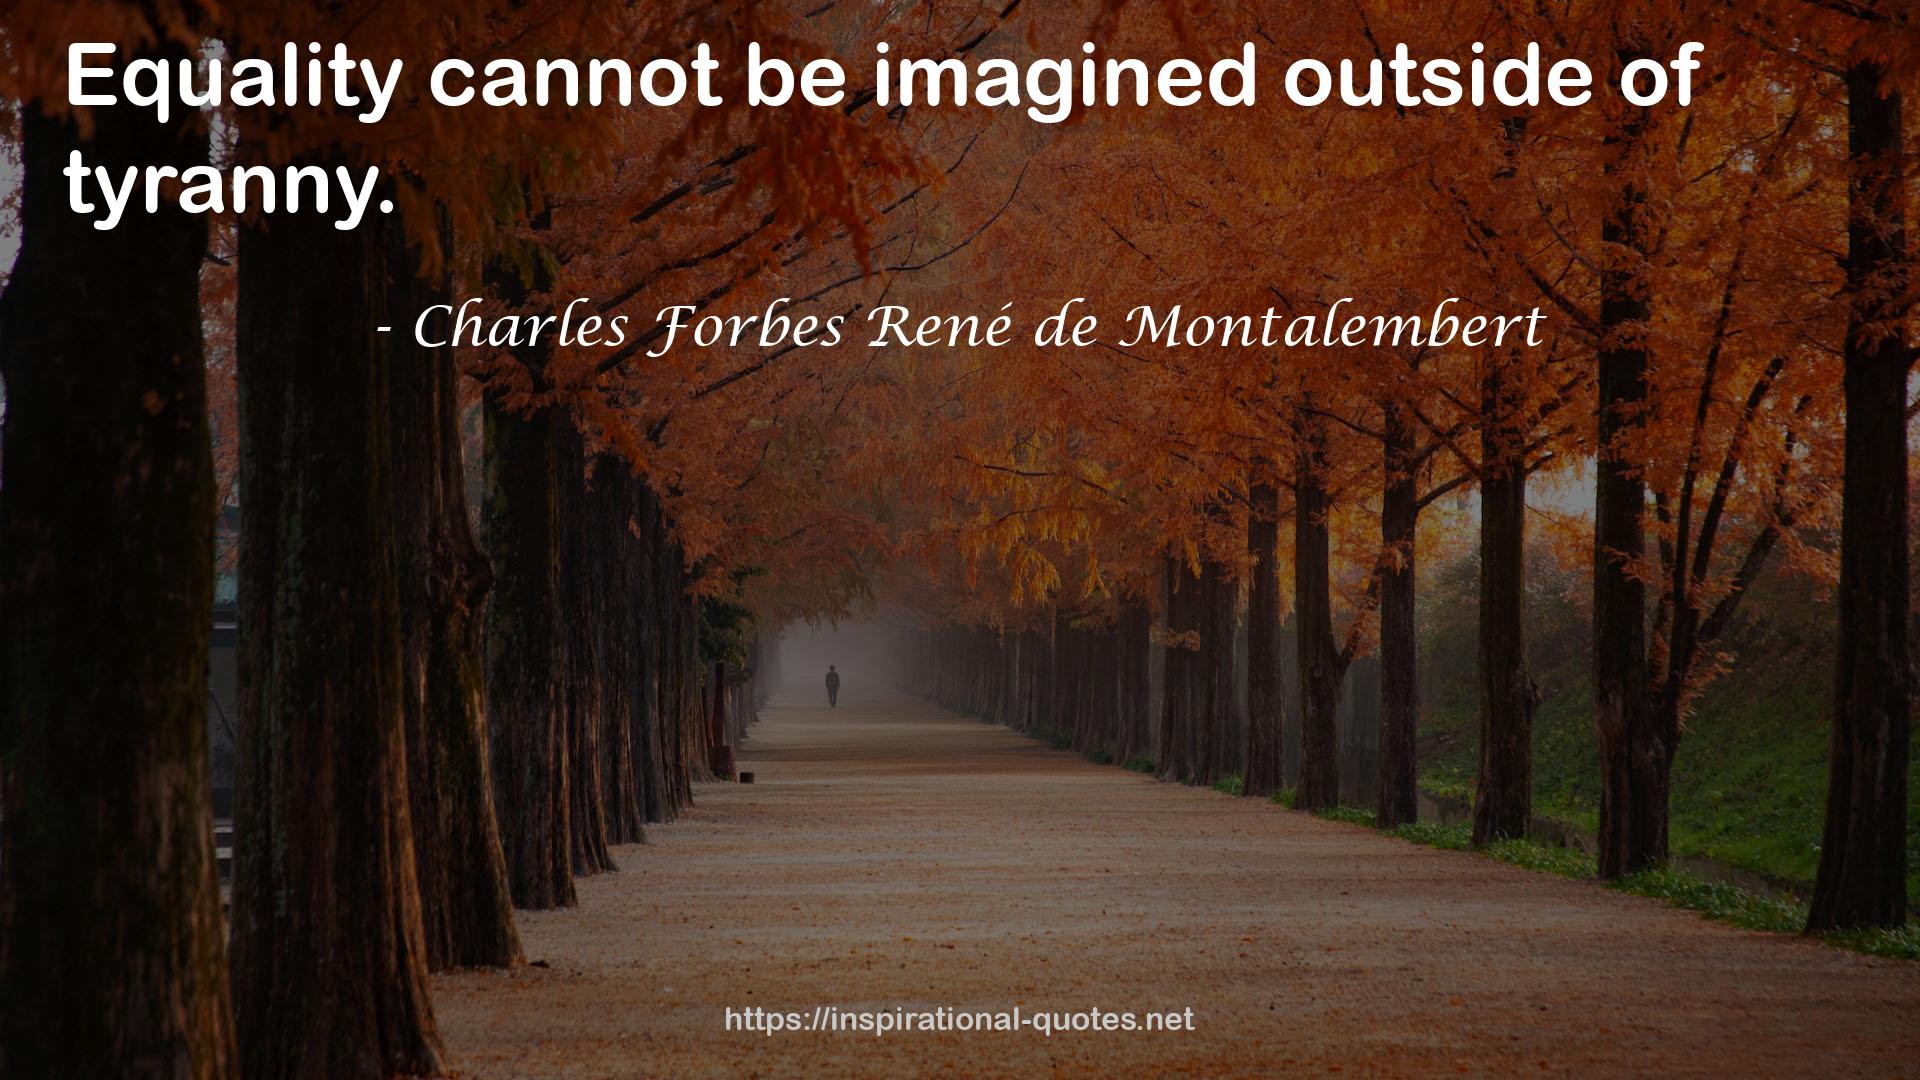 Charles Forbes René de Montalembert QUOTES